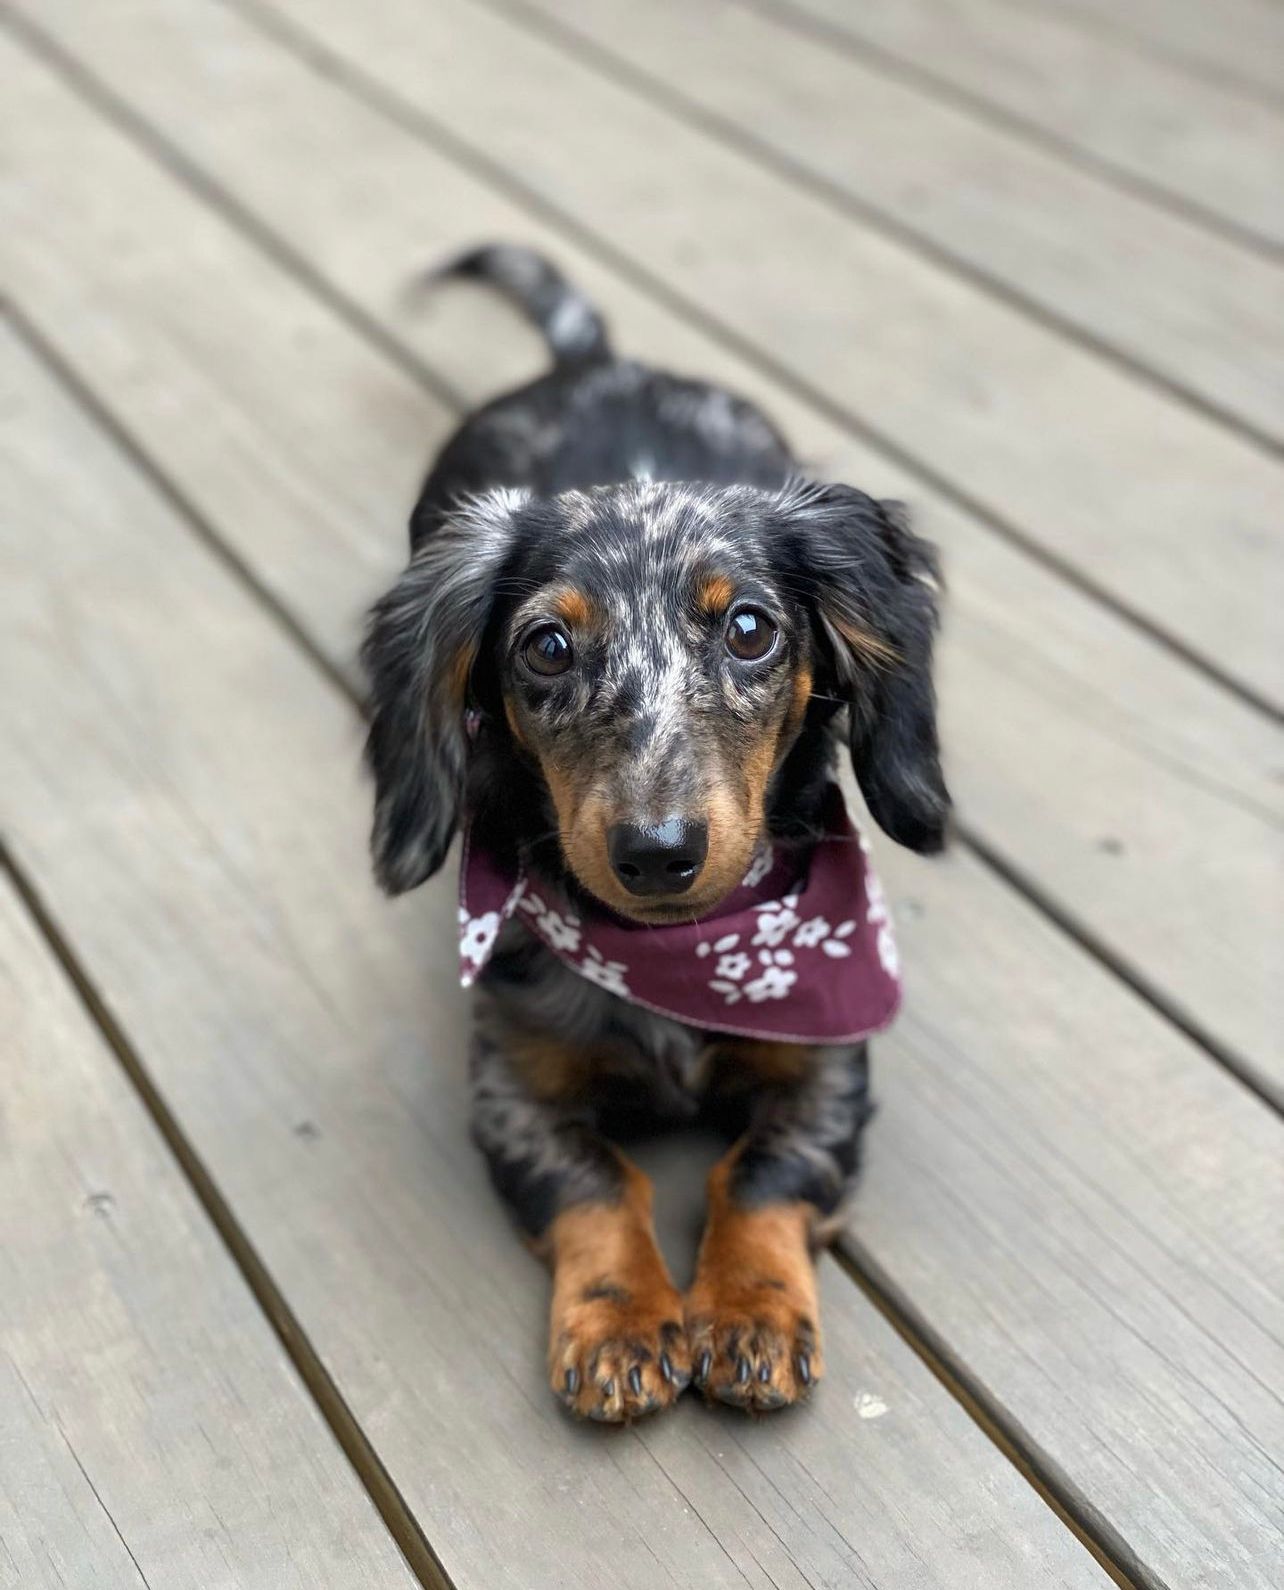 The cute look - Chatham Dog Bandana from The Paws